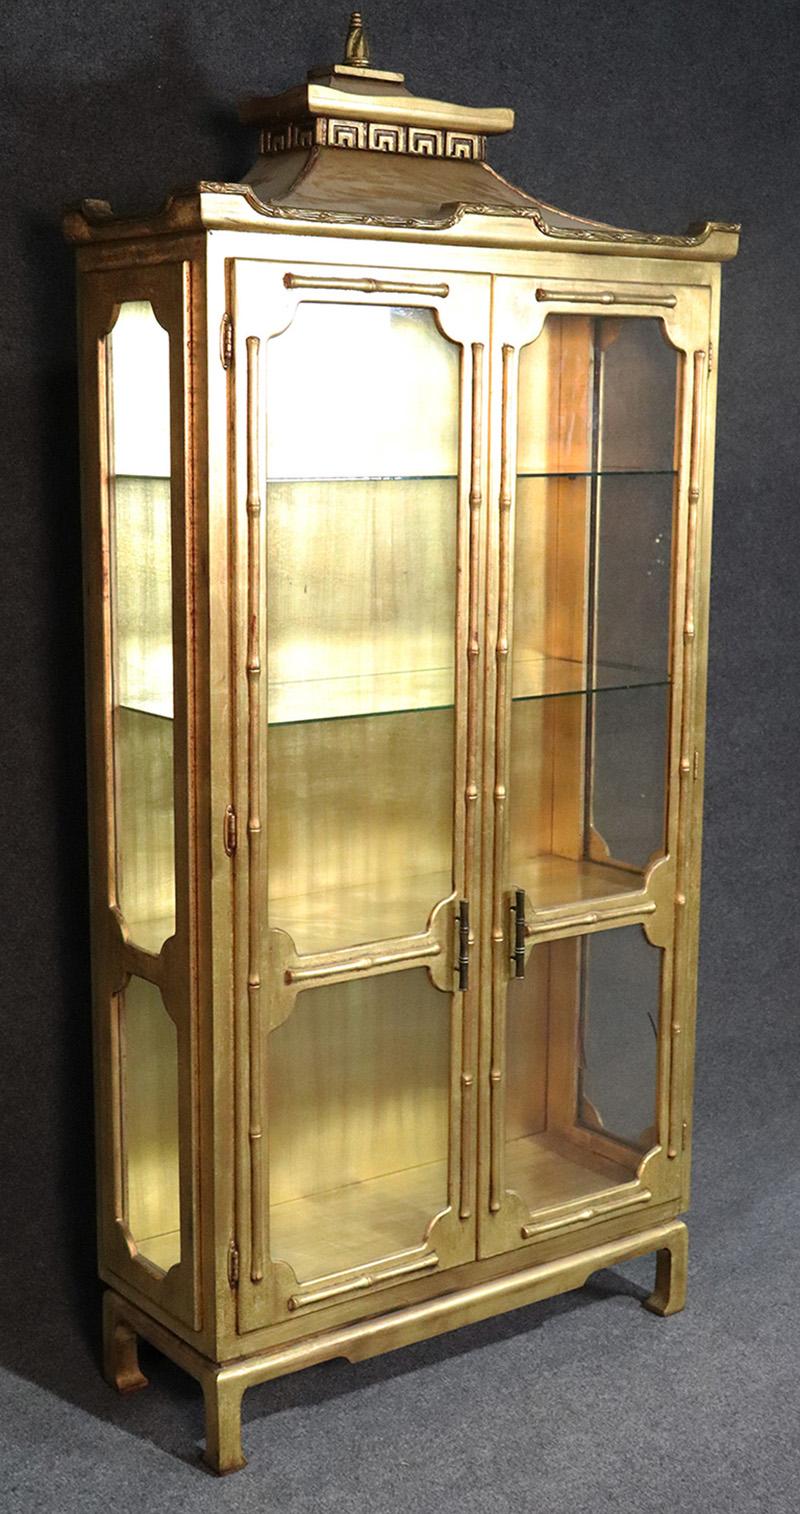 This is a glamorous and decadently designed cabinet! Layered in pure gold leaf, real gold, not paint! This cabinet cost a lot of money to make and it's lighted with glass shelves so not only can you display with beauty, you can display beautiful